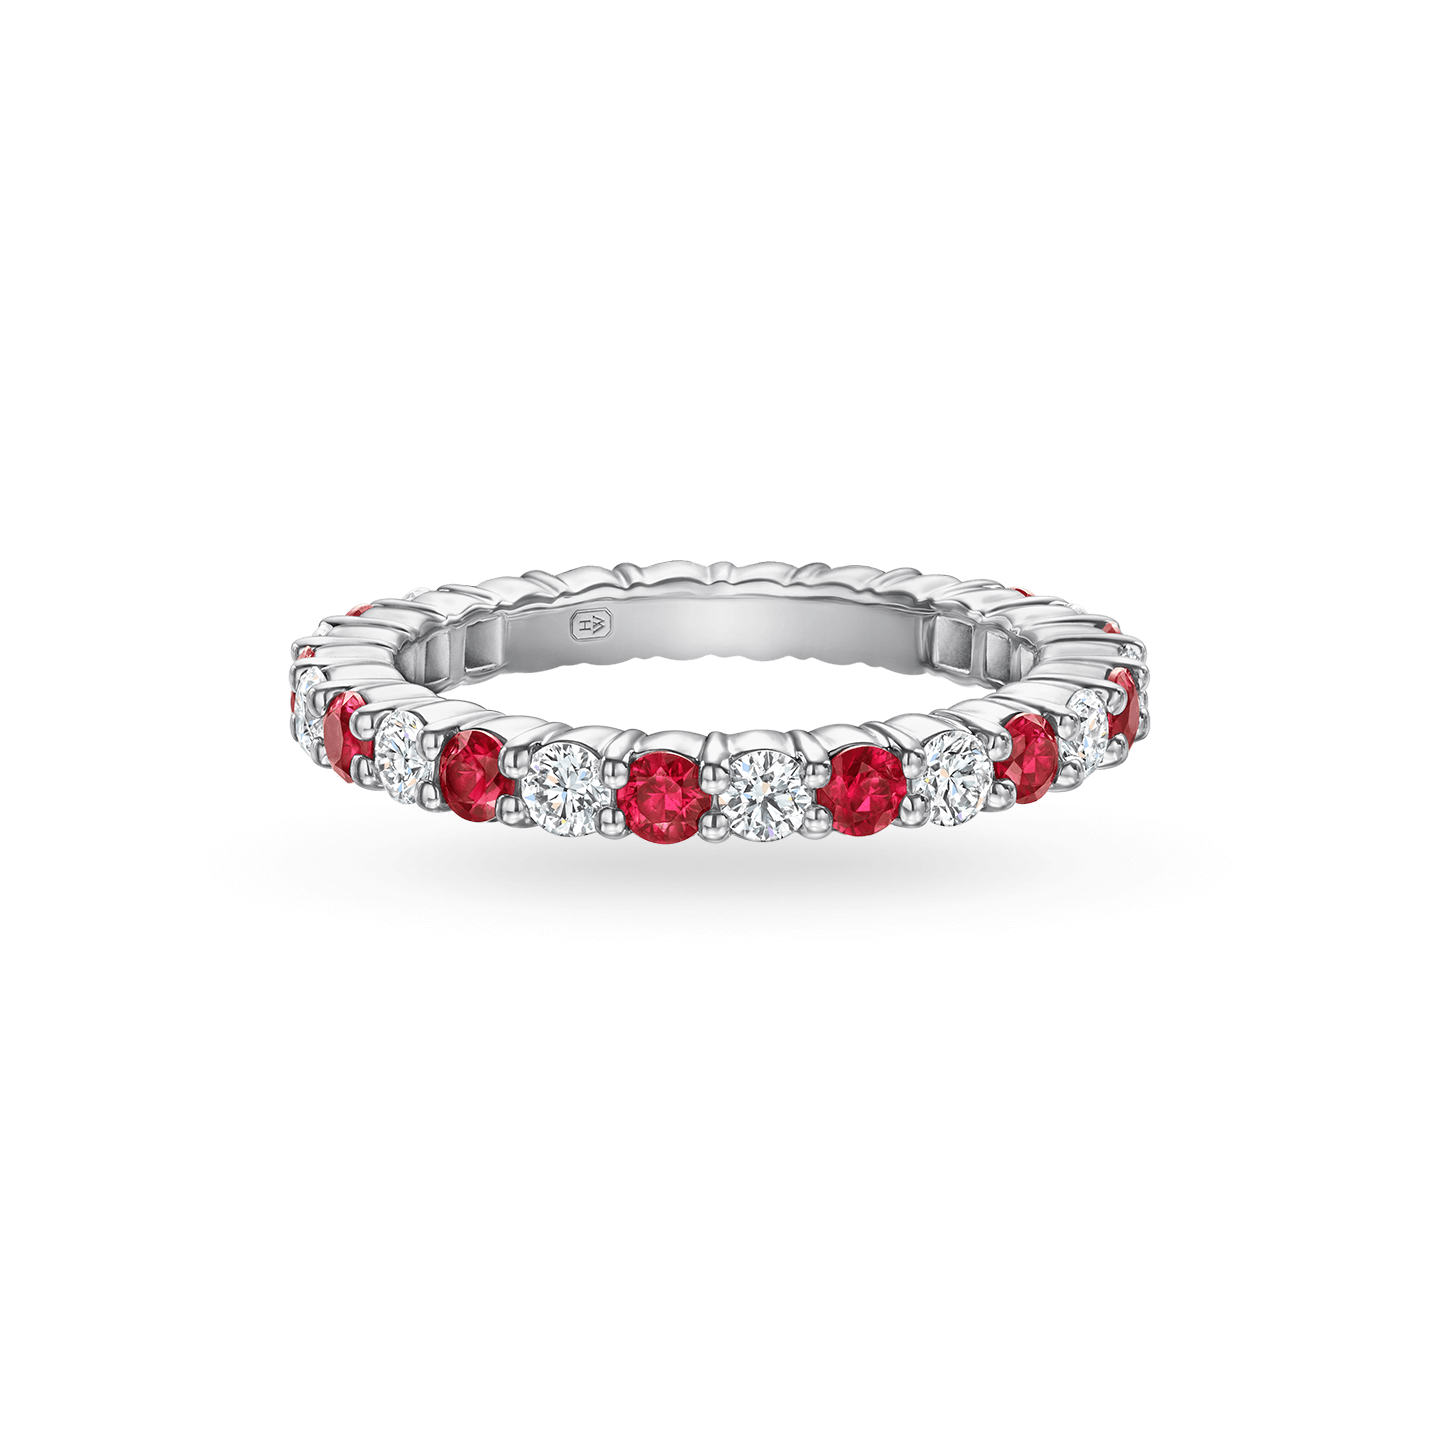 Pear Cut Halo Ruby & Diamond Engagement Ring 14K White Gold 8.34ct - AD4305